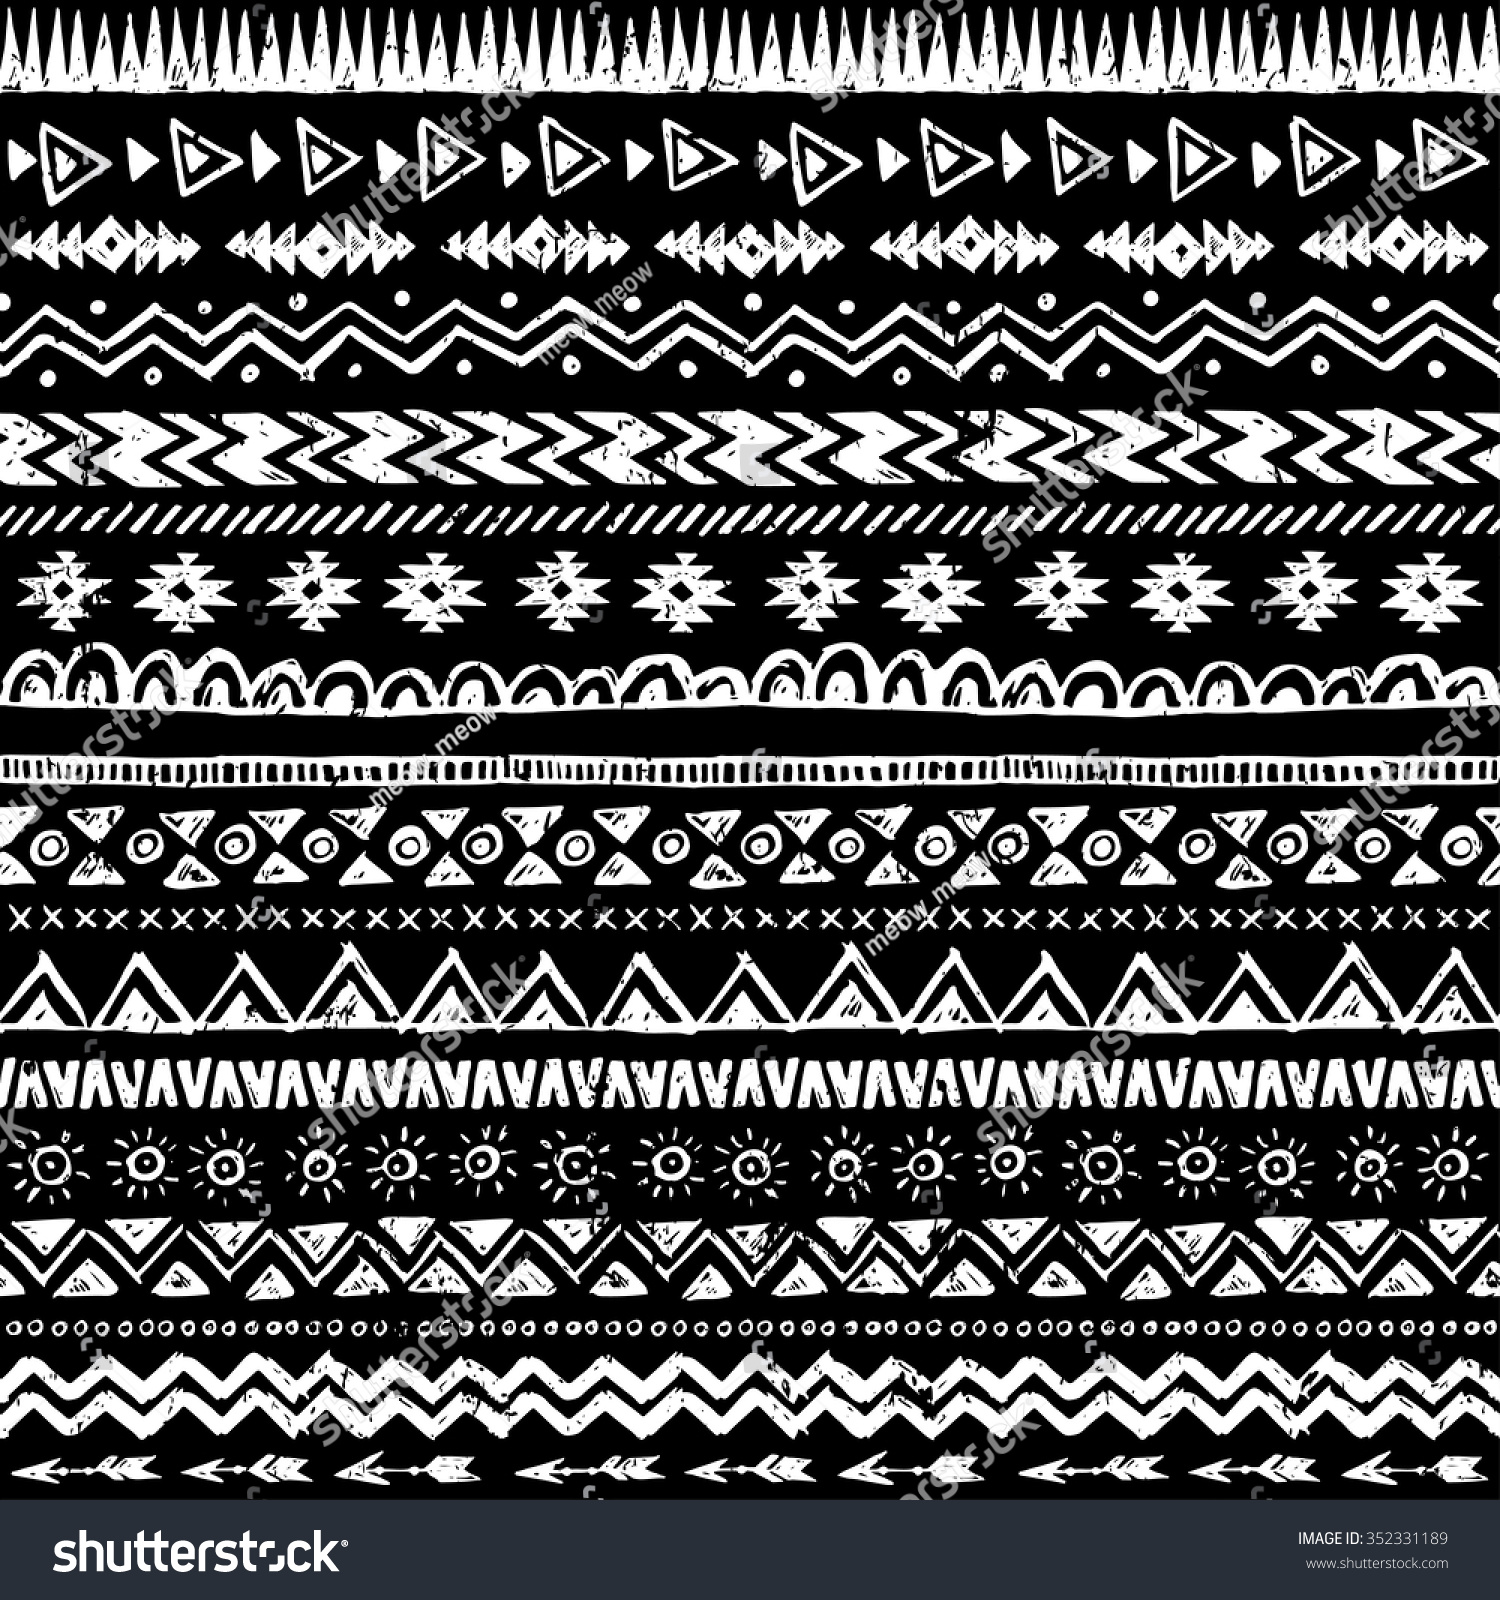 Black And White Tribal Doodle Seamless Pattern. Aztec Grunge Abstract ...